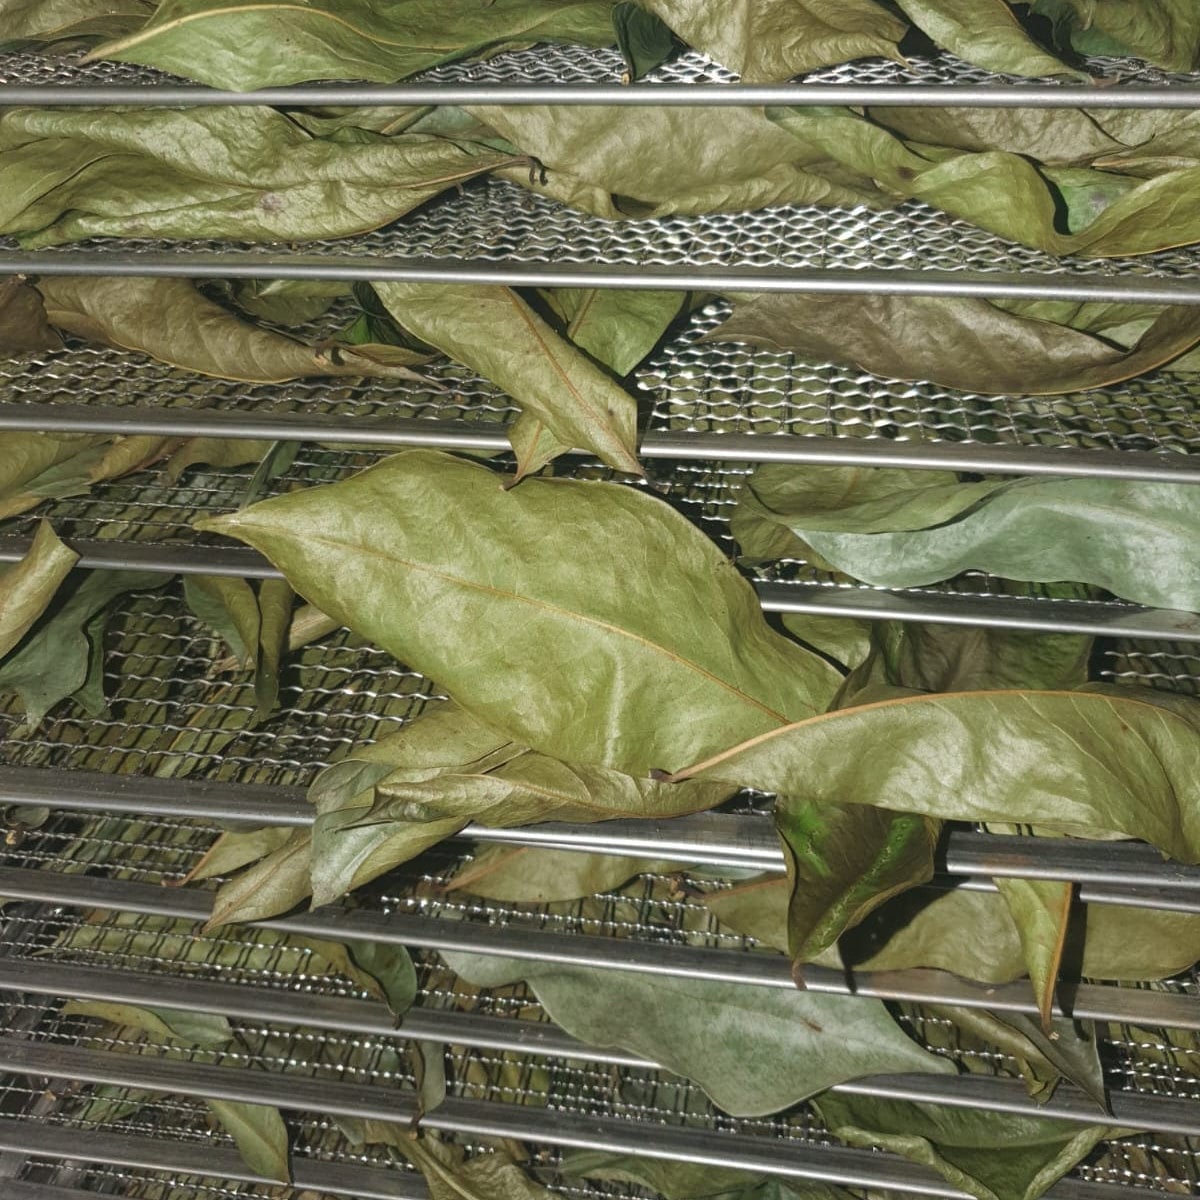 Dry Soursop leaves and powder at wholesale price - guanabana, soursop, graviola, or Brazilian paw paw